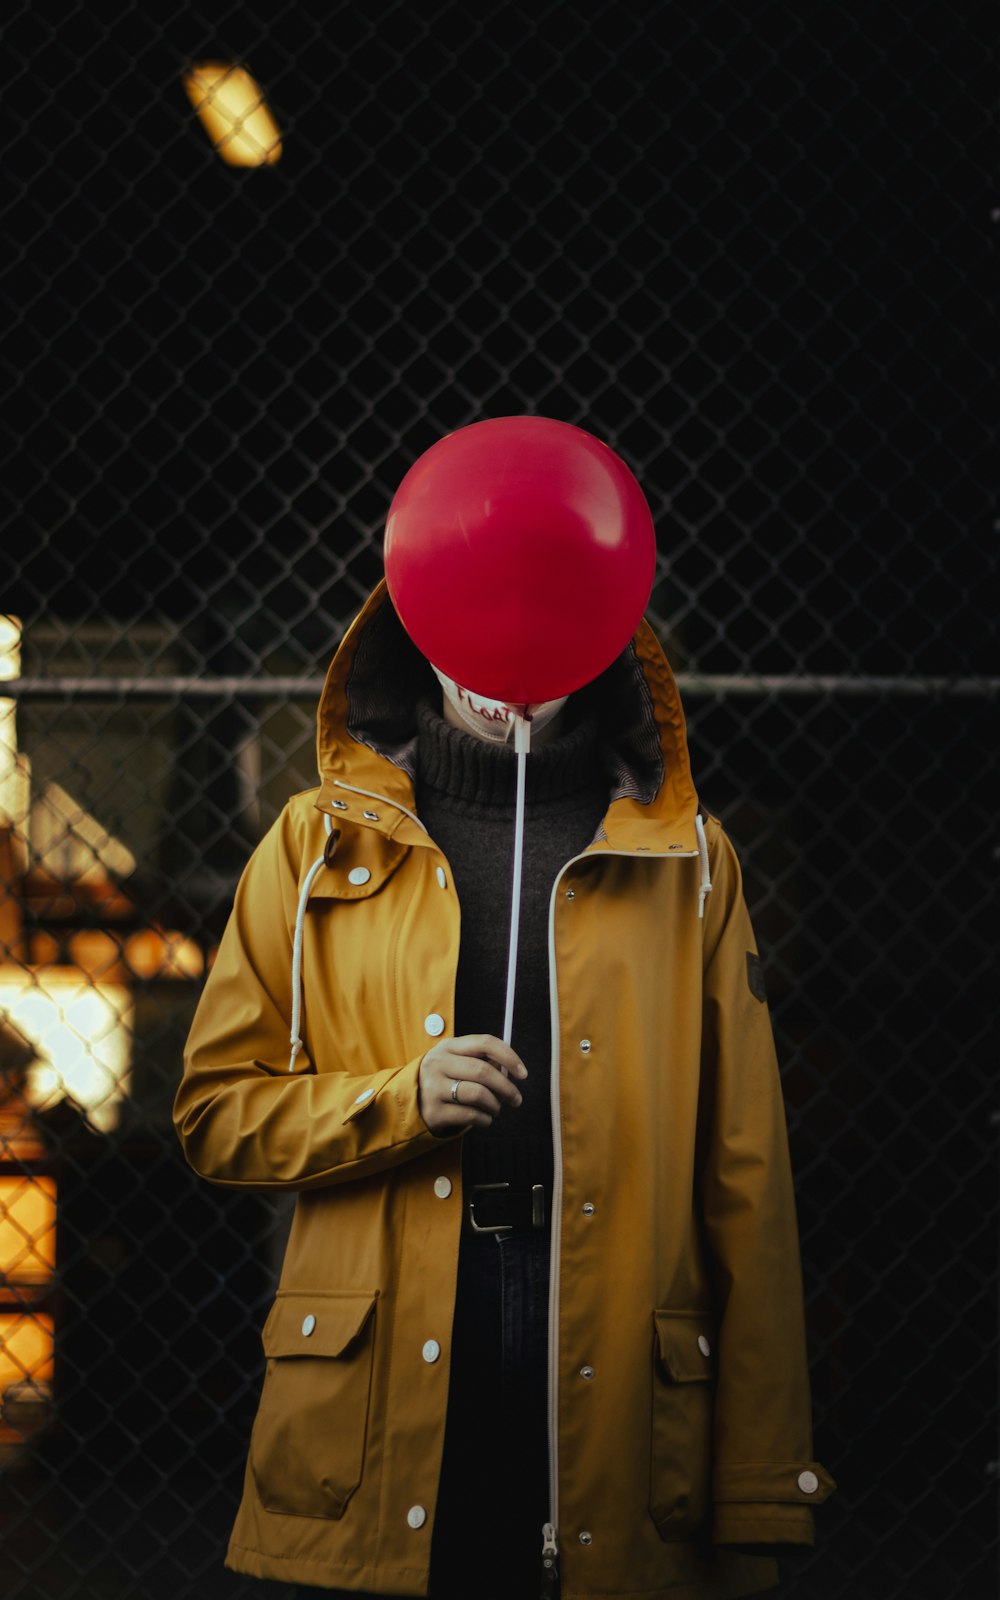 a person with a red balloon on their head